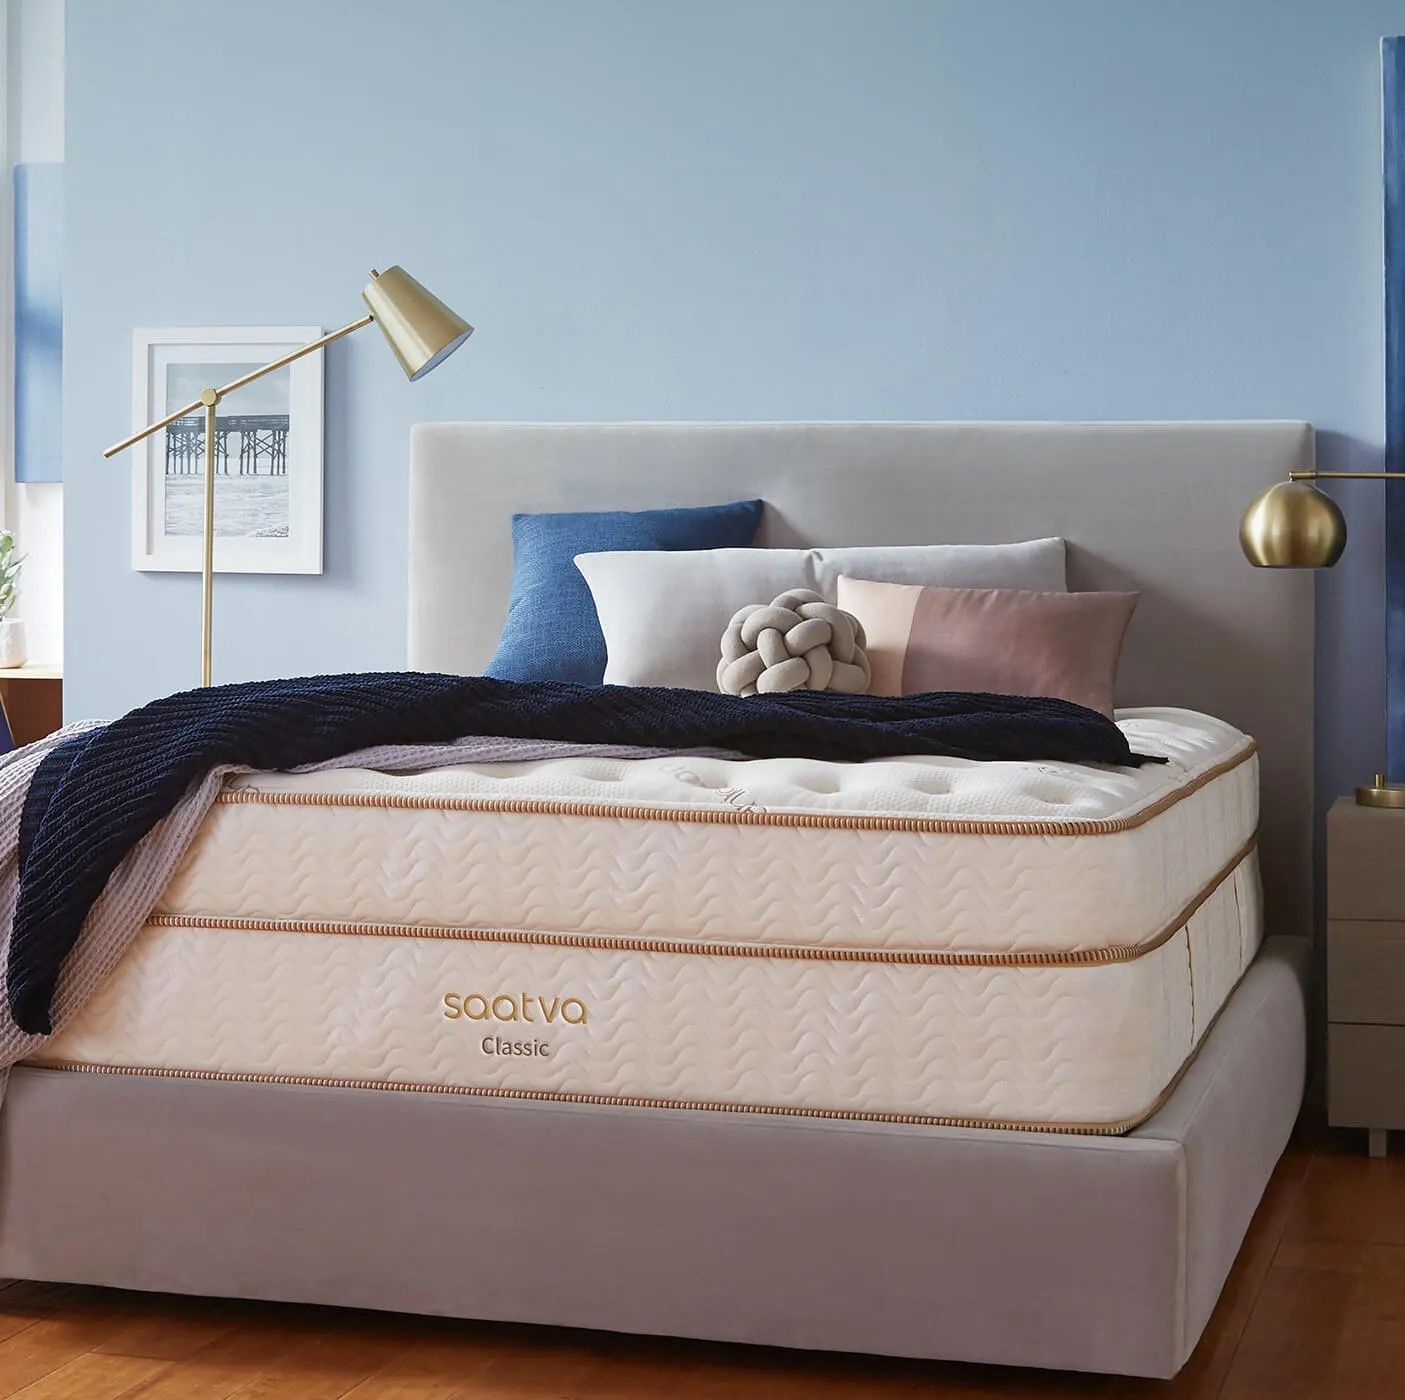 Trust and Believe, Saatva's Spring Mattress Sale is Worth Shopping ASAP